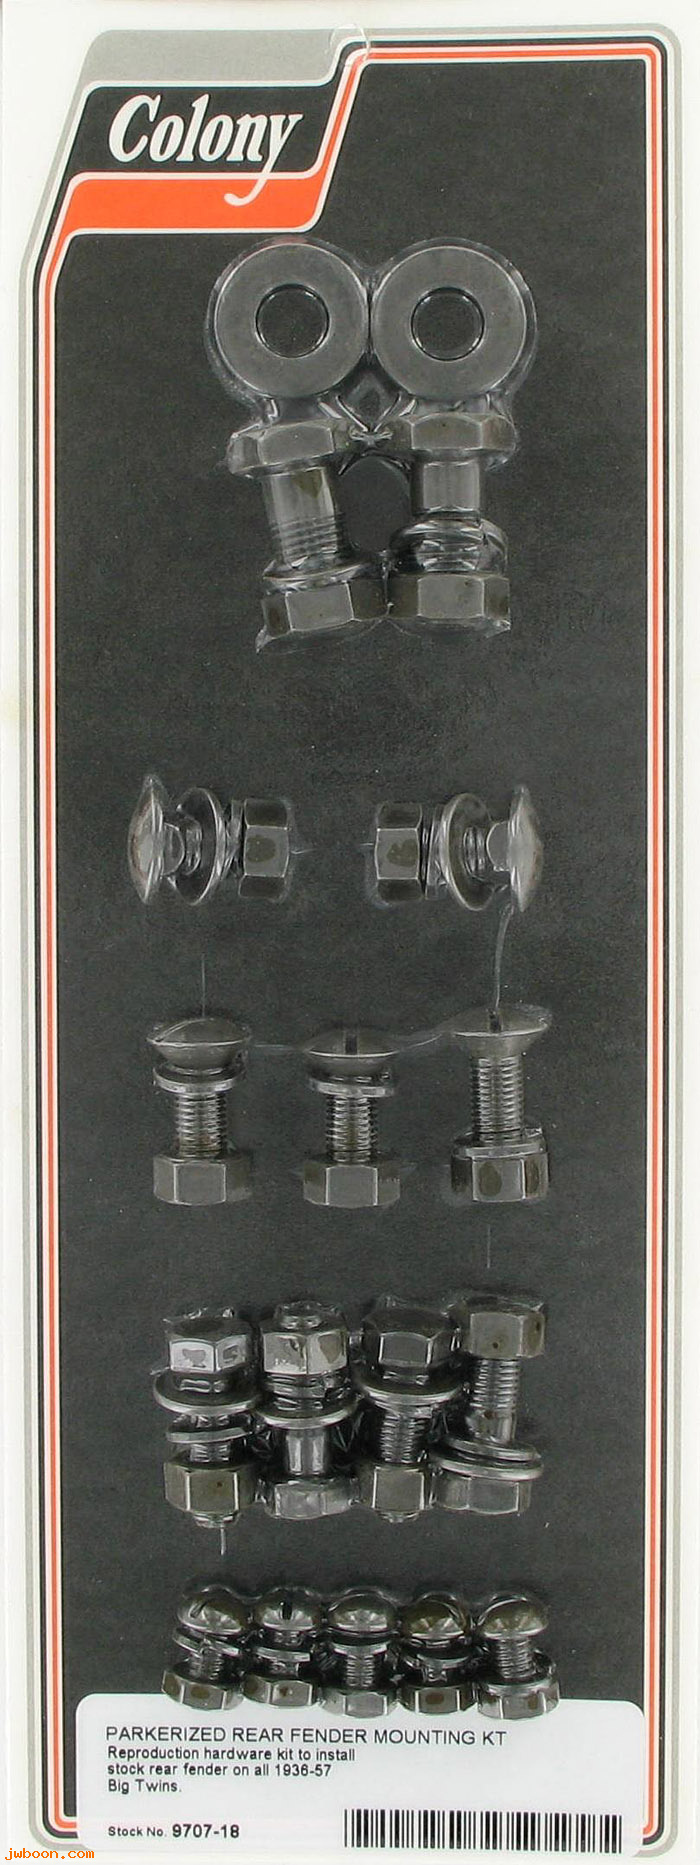 C 9707-18 (    4634 2404 5425): Rear fender mounting kit - CP bolts - Big Twins '36-'57